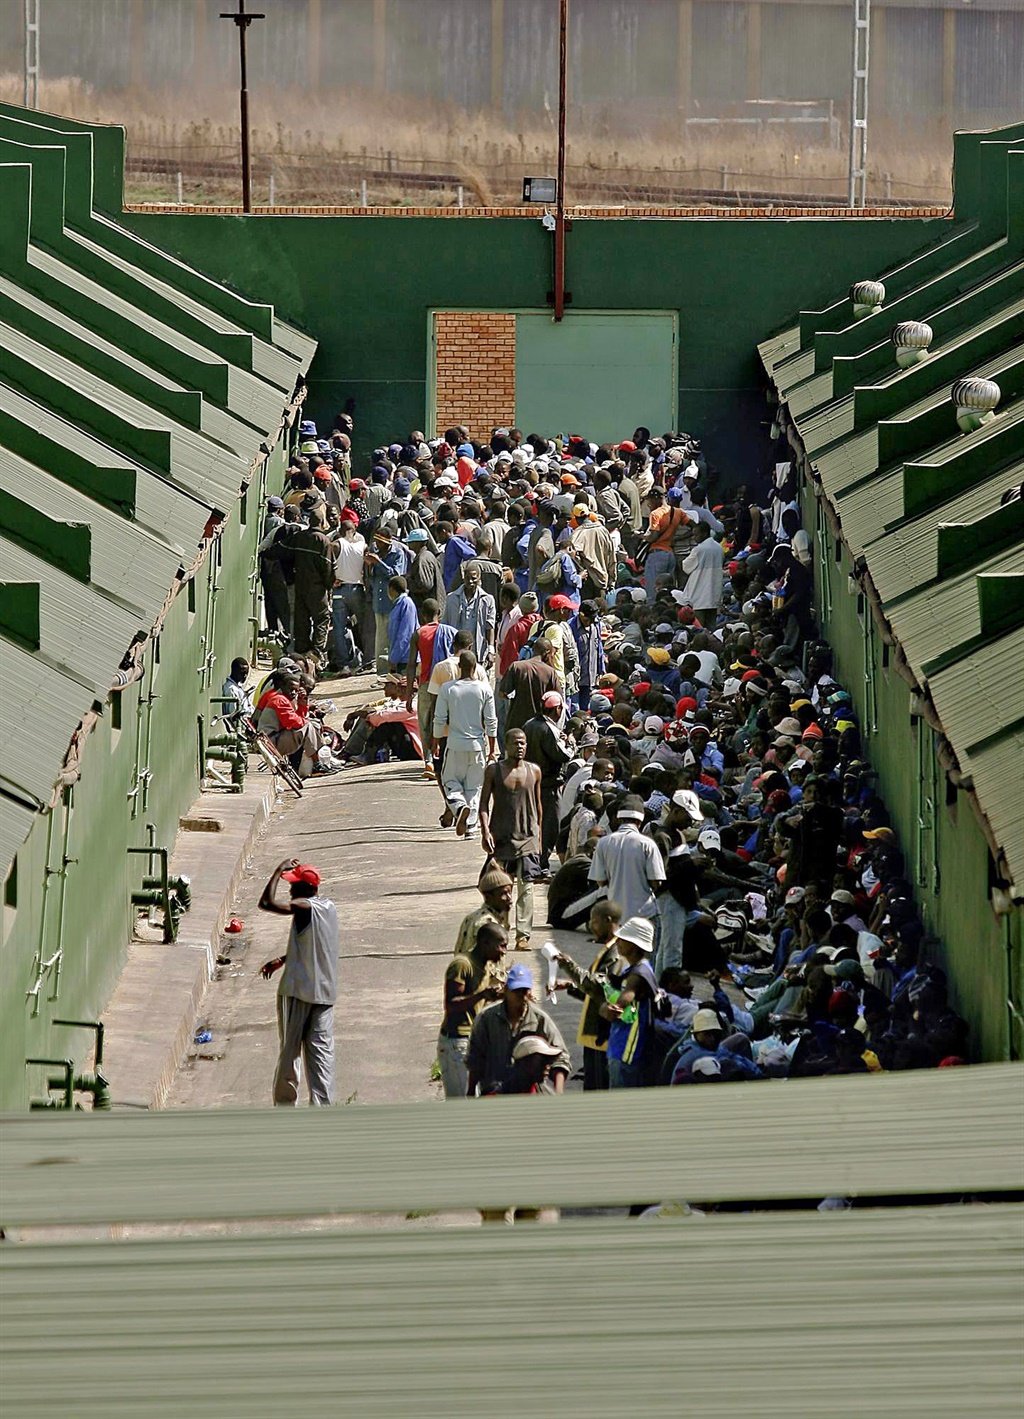 Hundreds of detained men on the other side of the repatriation tunnel at the Lindela Repatriation Centre in Krugersdorp, South Africa. (Photograph by Lisa Skinner/Gallo Images)